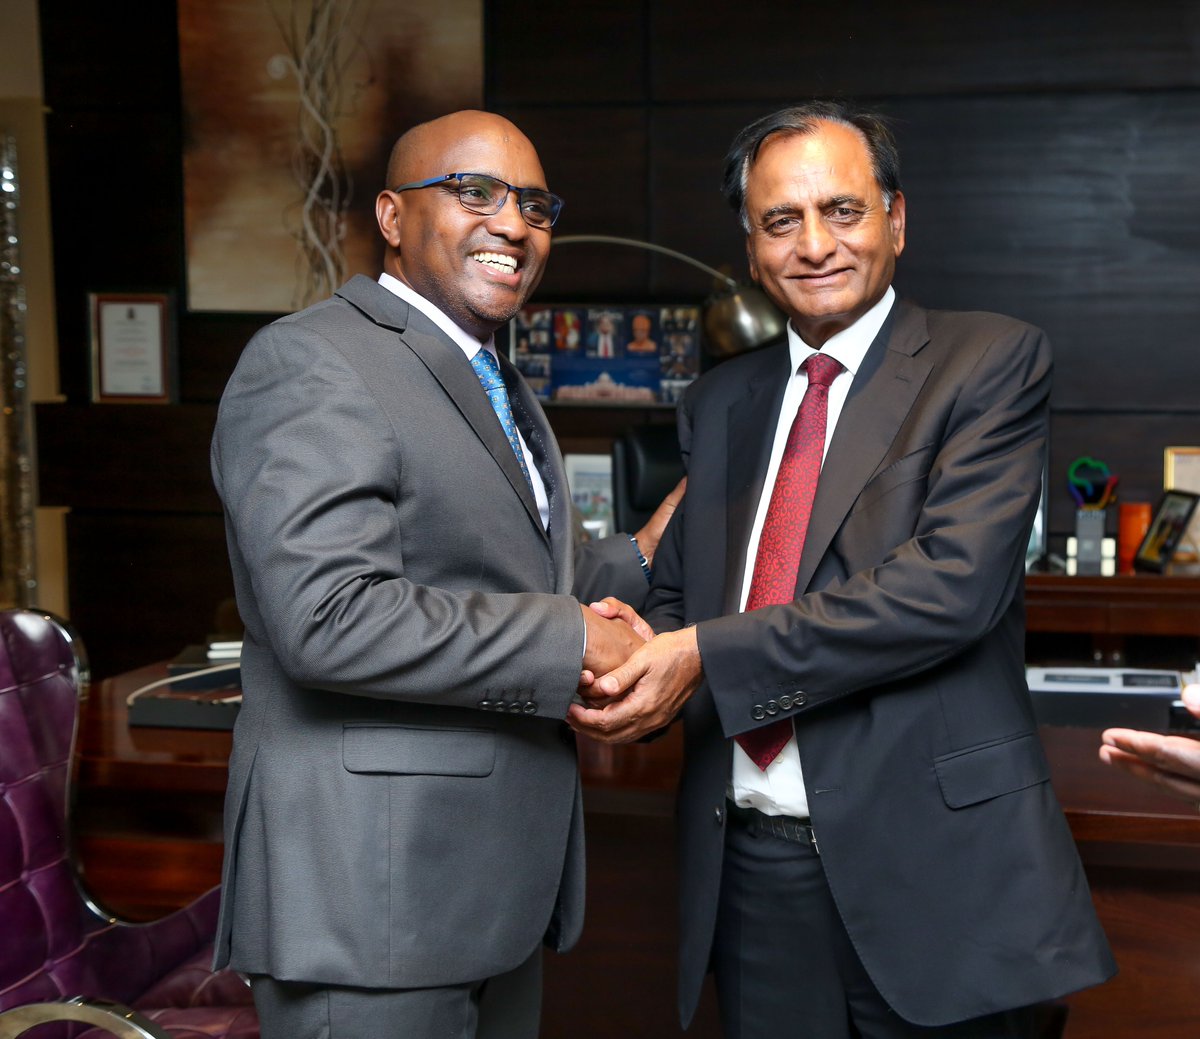 As part of our continued support for the manufacturing sector KCB Group CEO, @Saagite paid a courtesy call to Mr. @RavalNarendra Founder & Chairman of @Devkigroup. 

#ForPeopleForBetter #KCBNiYetu